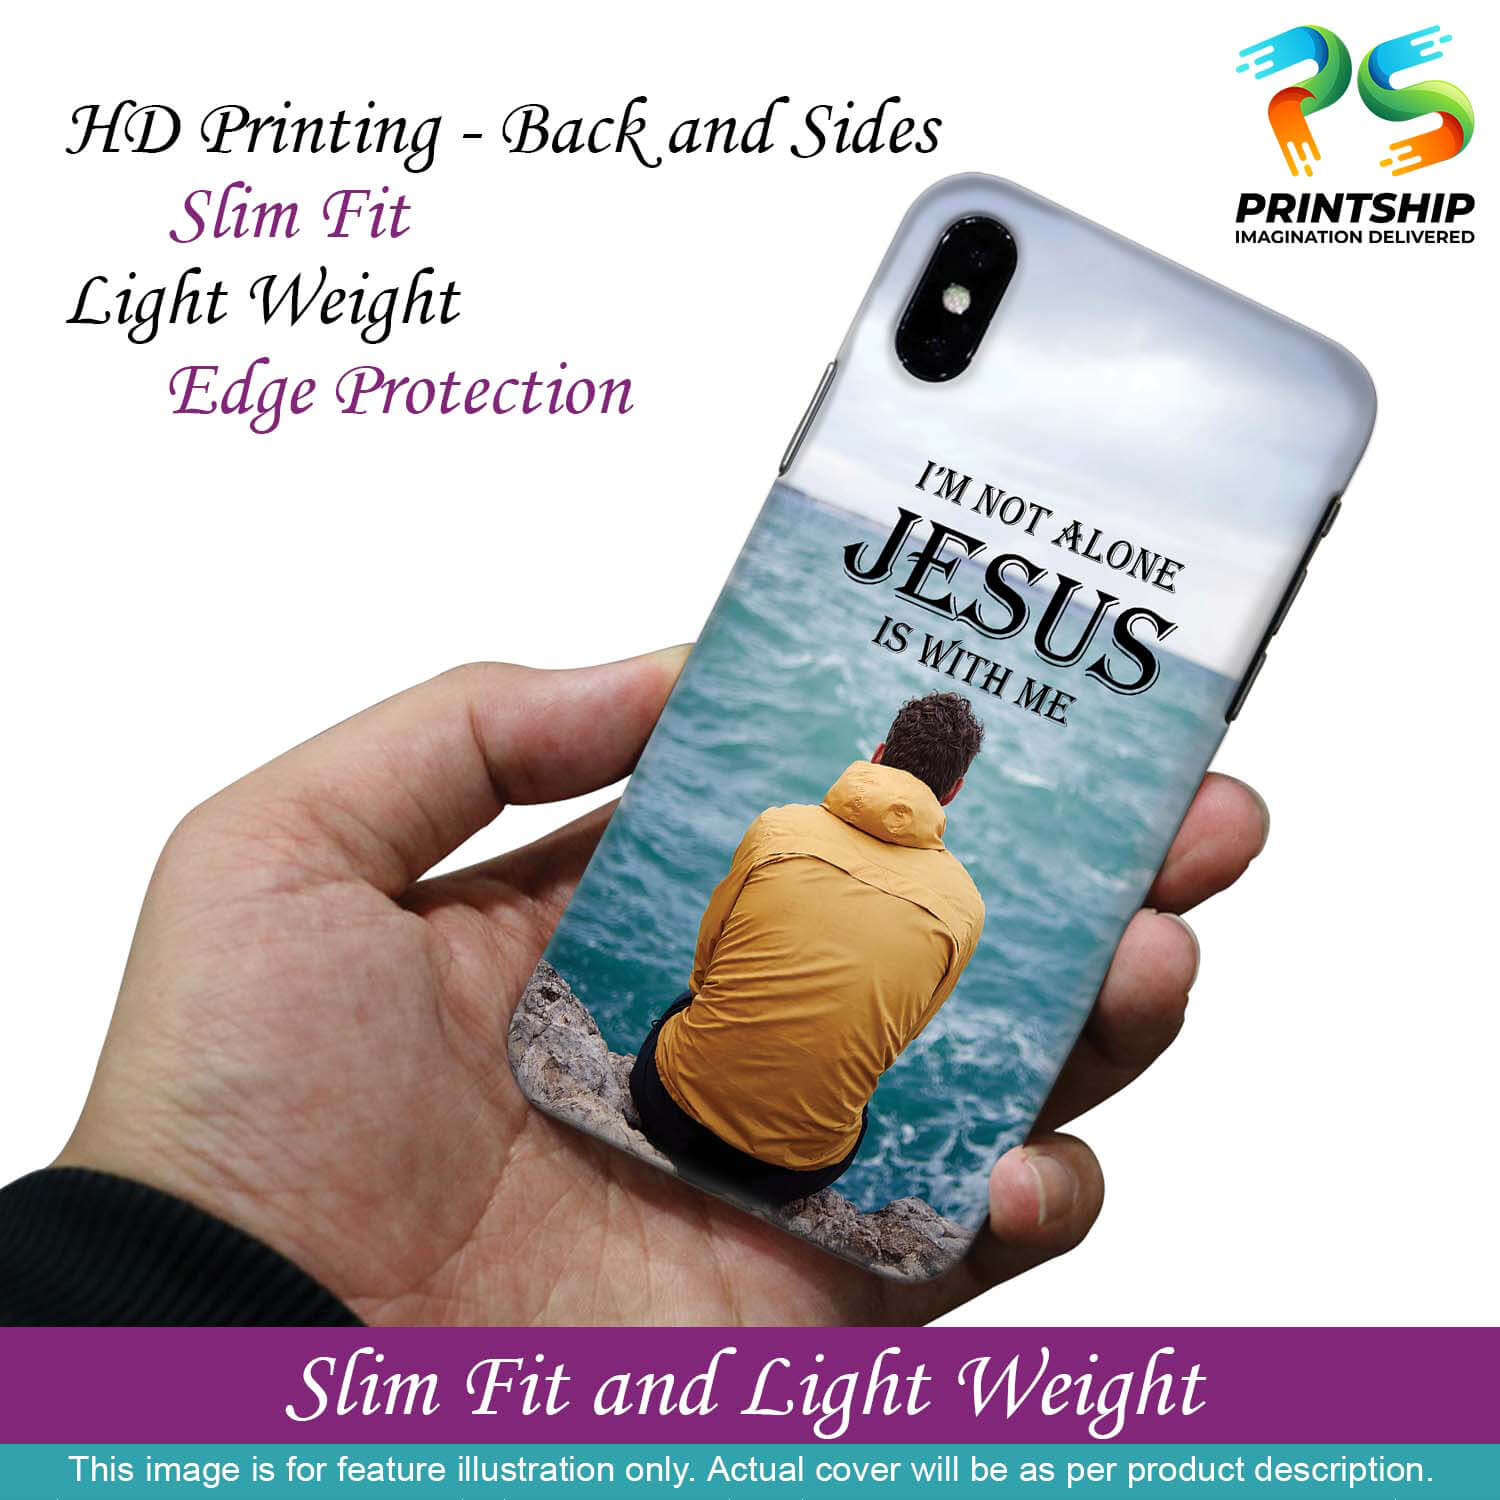 W0007-Jesus is with Me Back Cover for Oppo A59